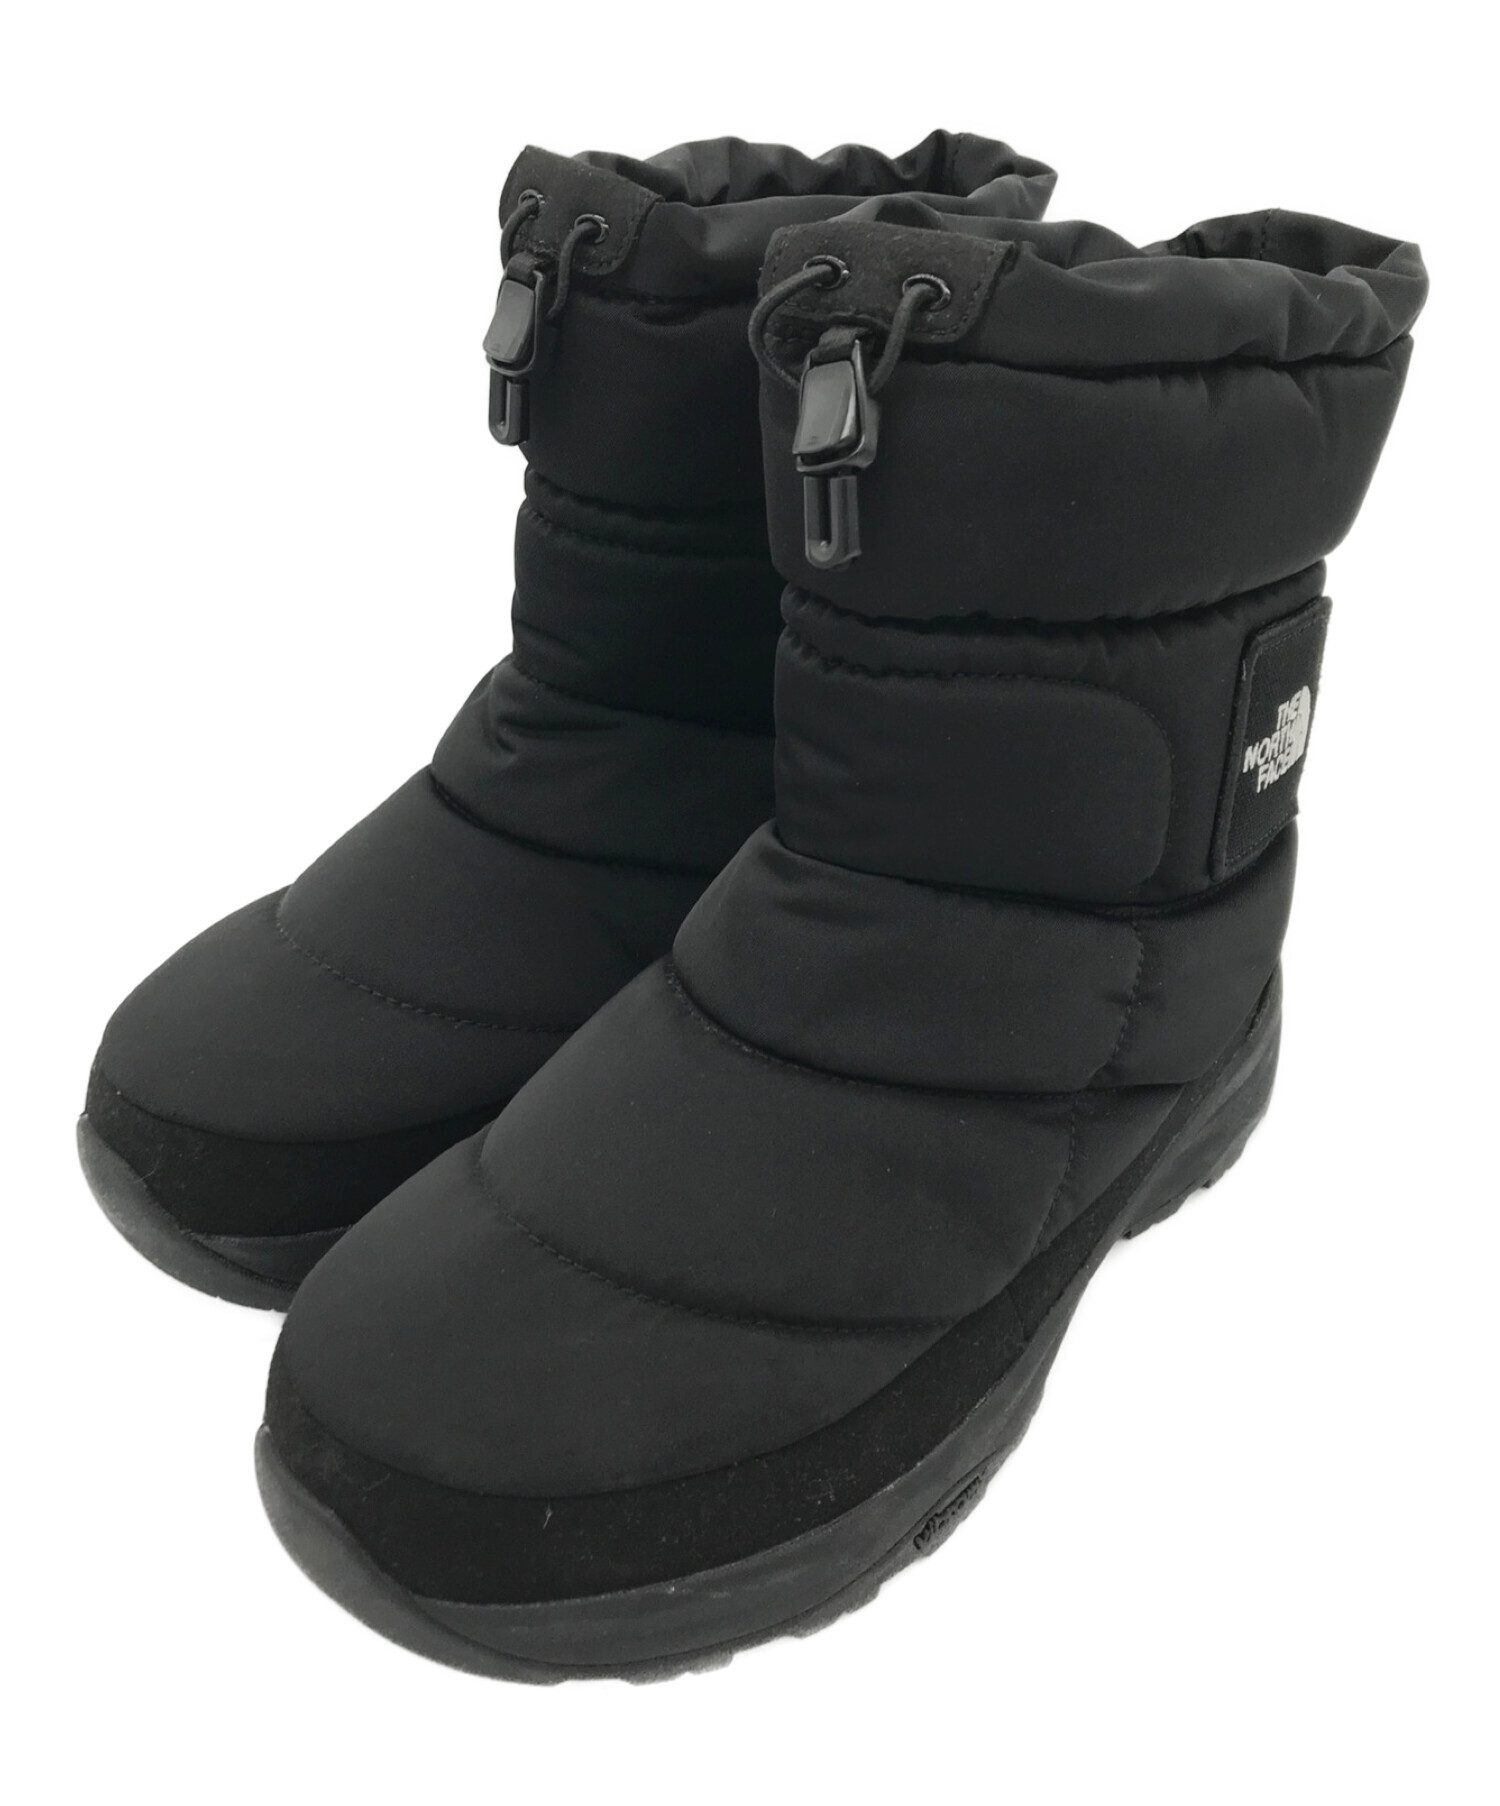 28 THE NORTH FACE Nuptse Bootie WP